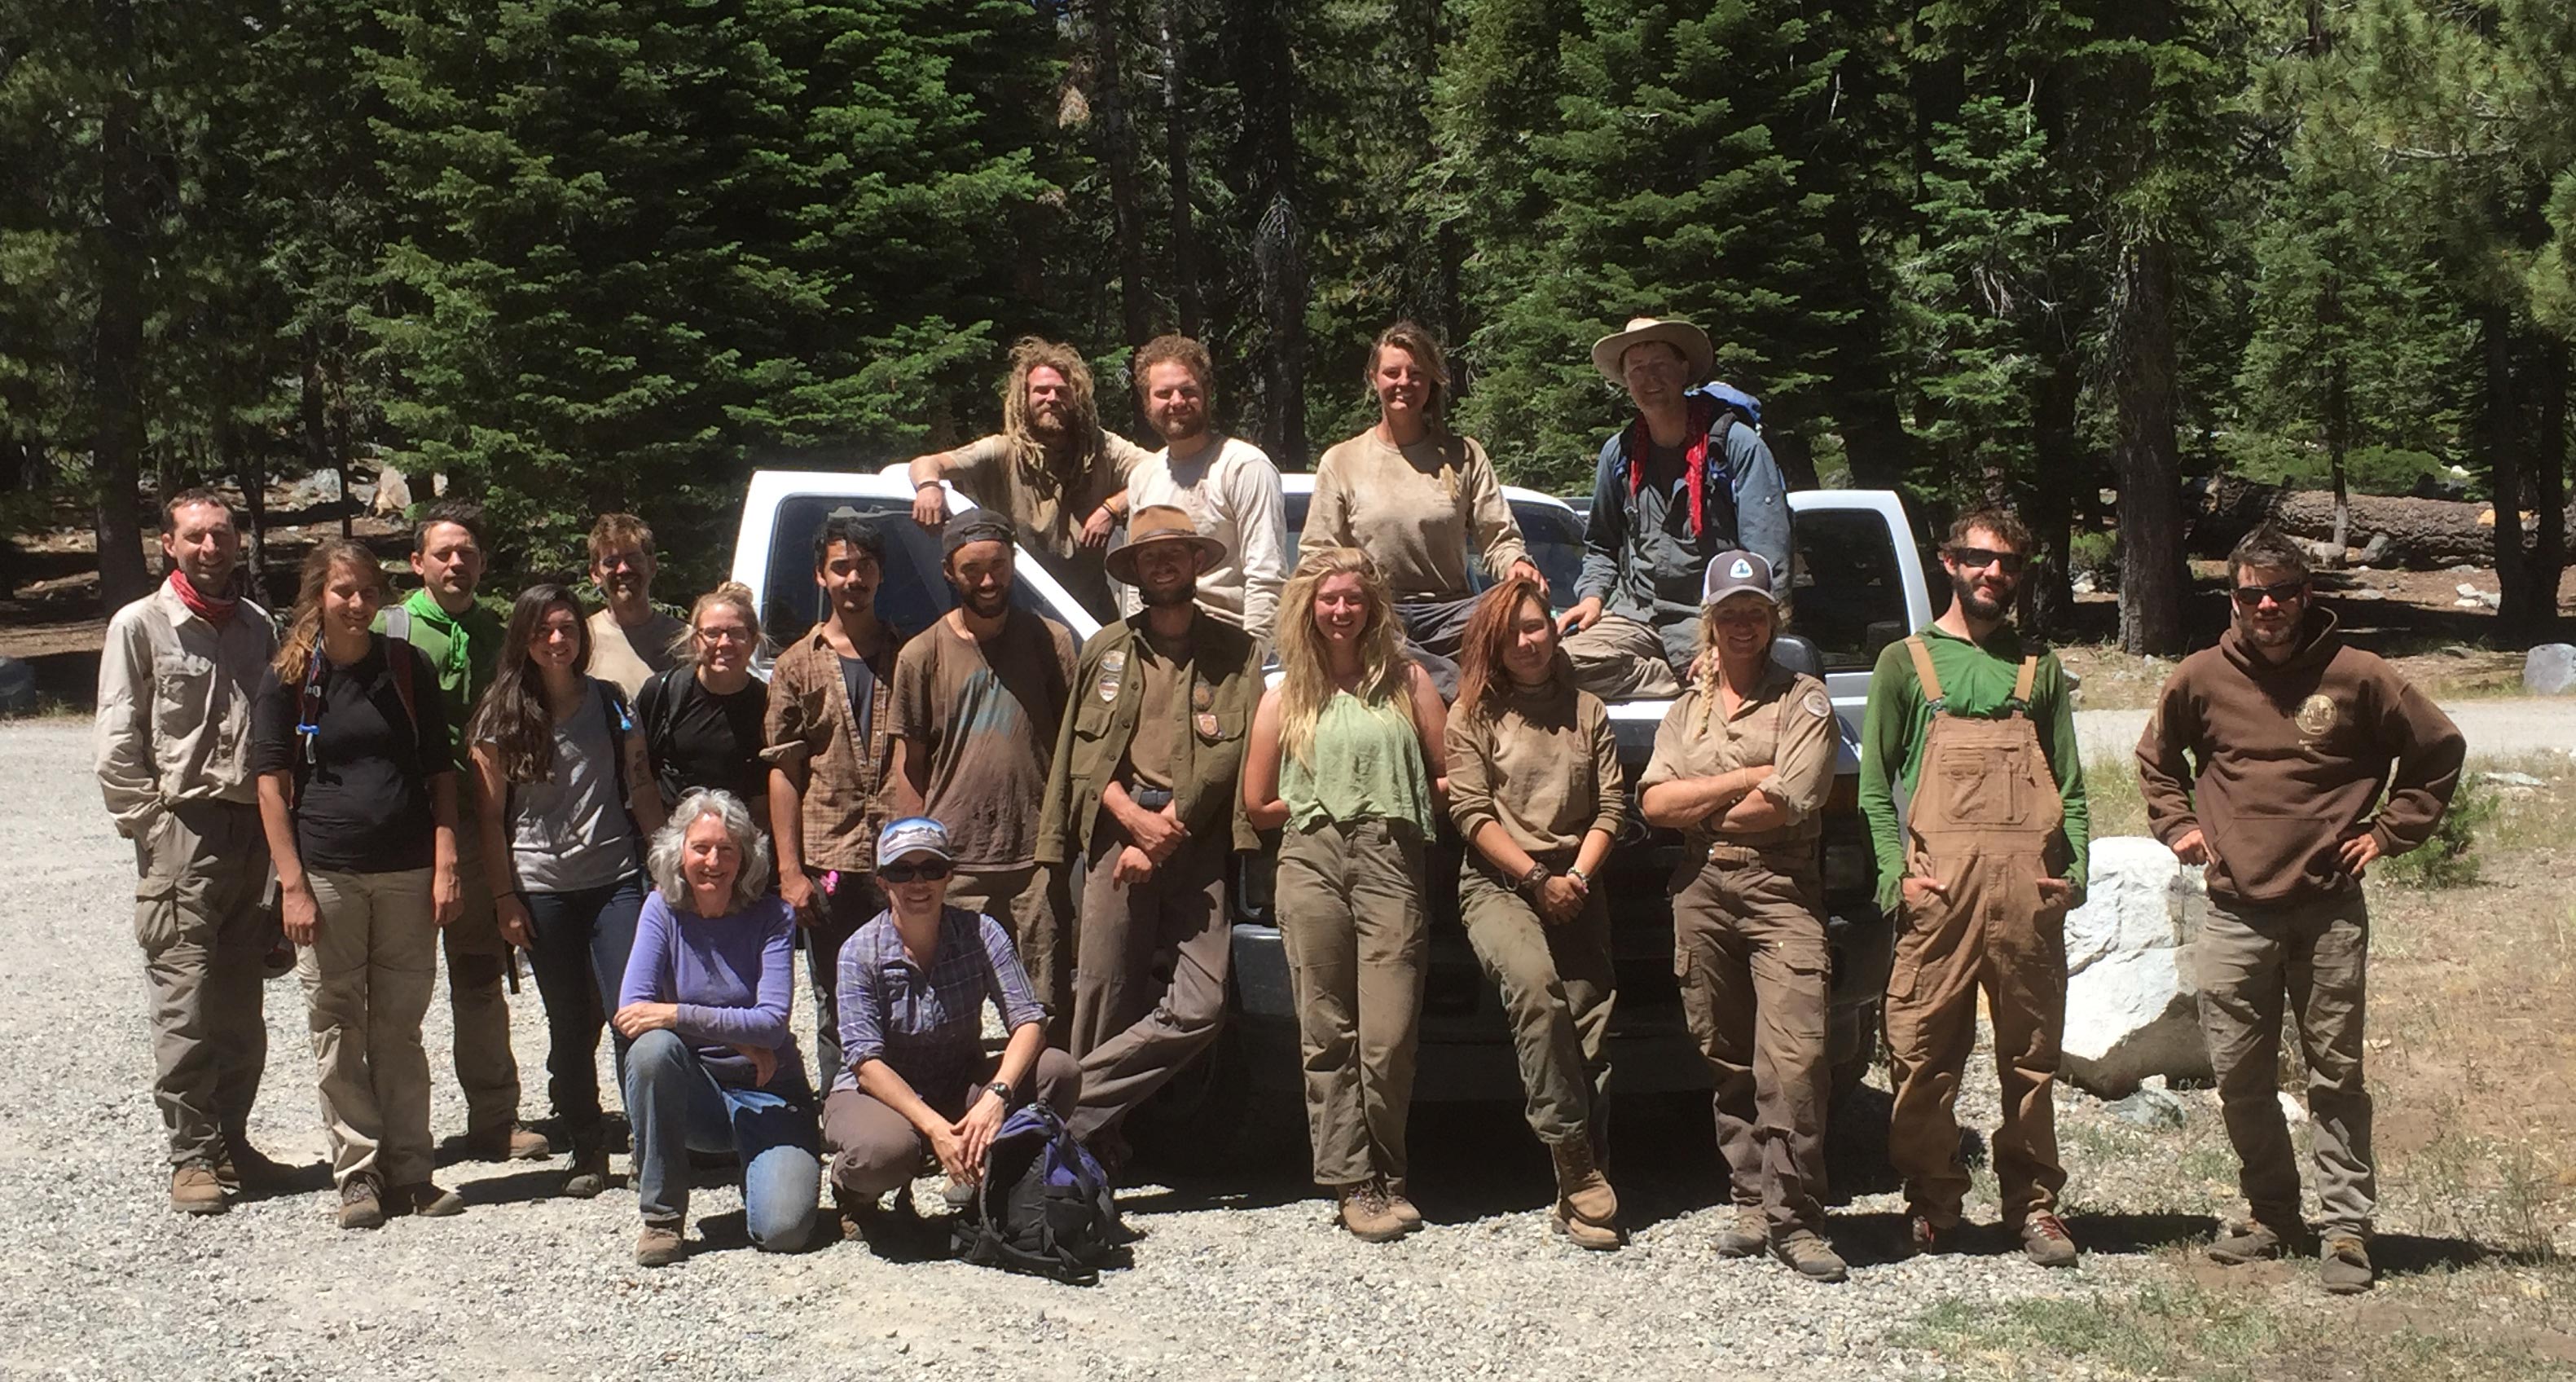 The ACE crew, dirty and smiling, during the July-August 2016 season in the Sierra Buttes. Photo courtesy of Clare "Bucket" Major.